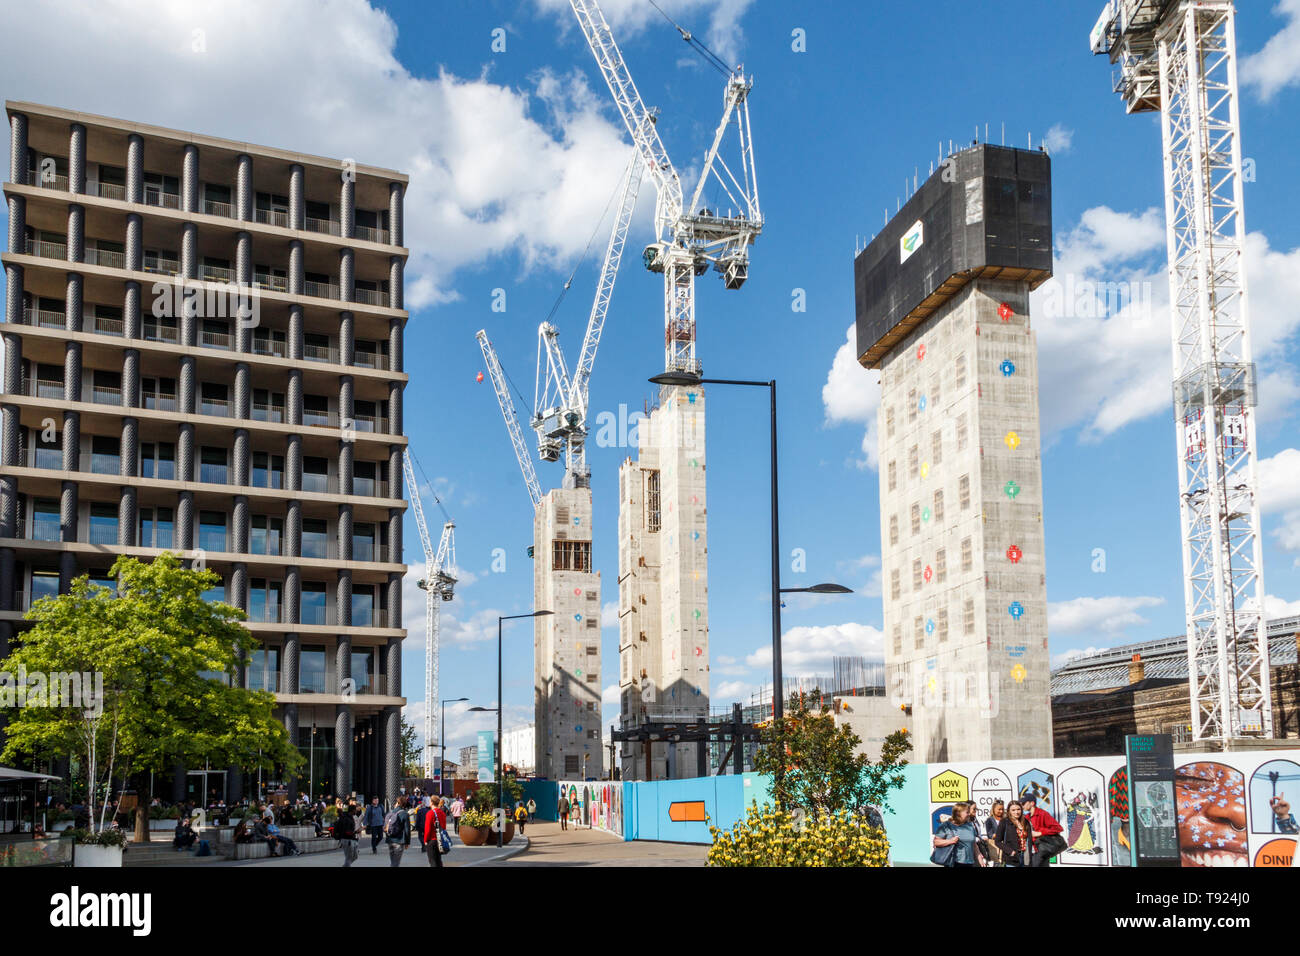 Continuing building works in the redevelopment of King's Cross, King's Boulevard, London, UK, 2019 Stock Photo